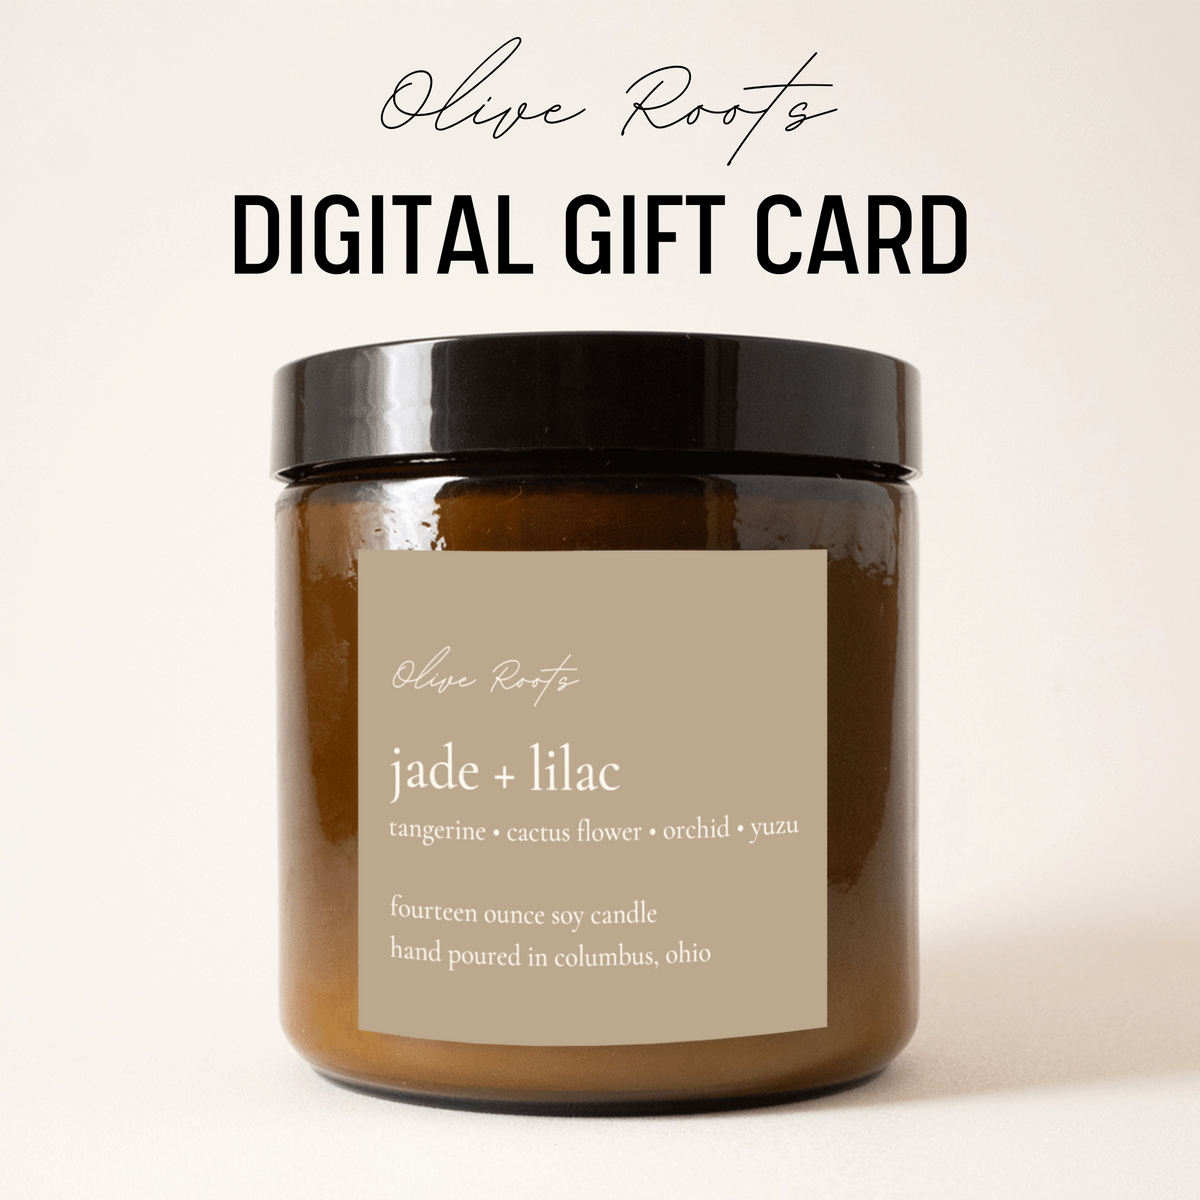 Olive Roots Digital Gift Card